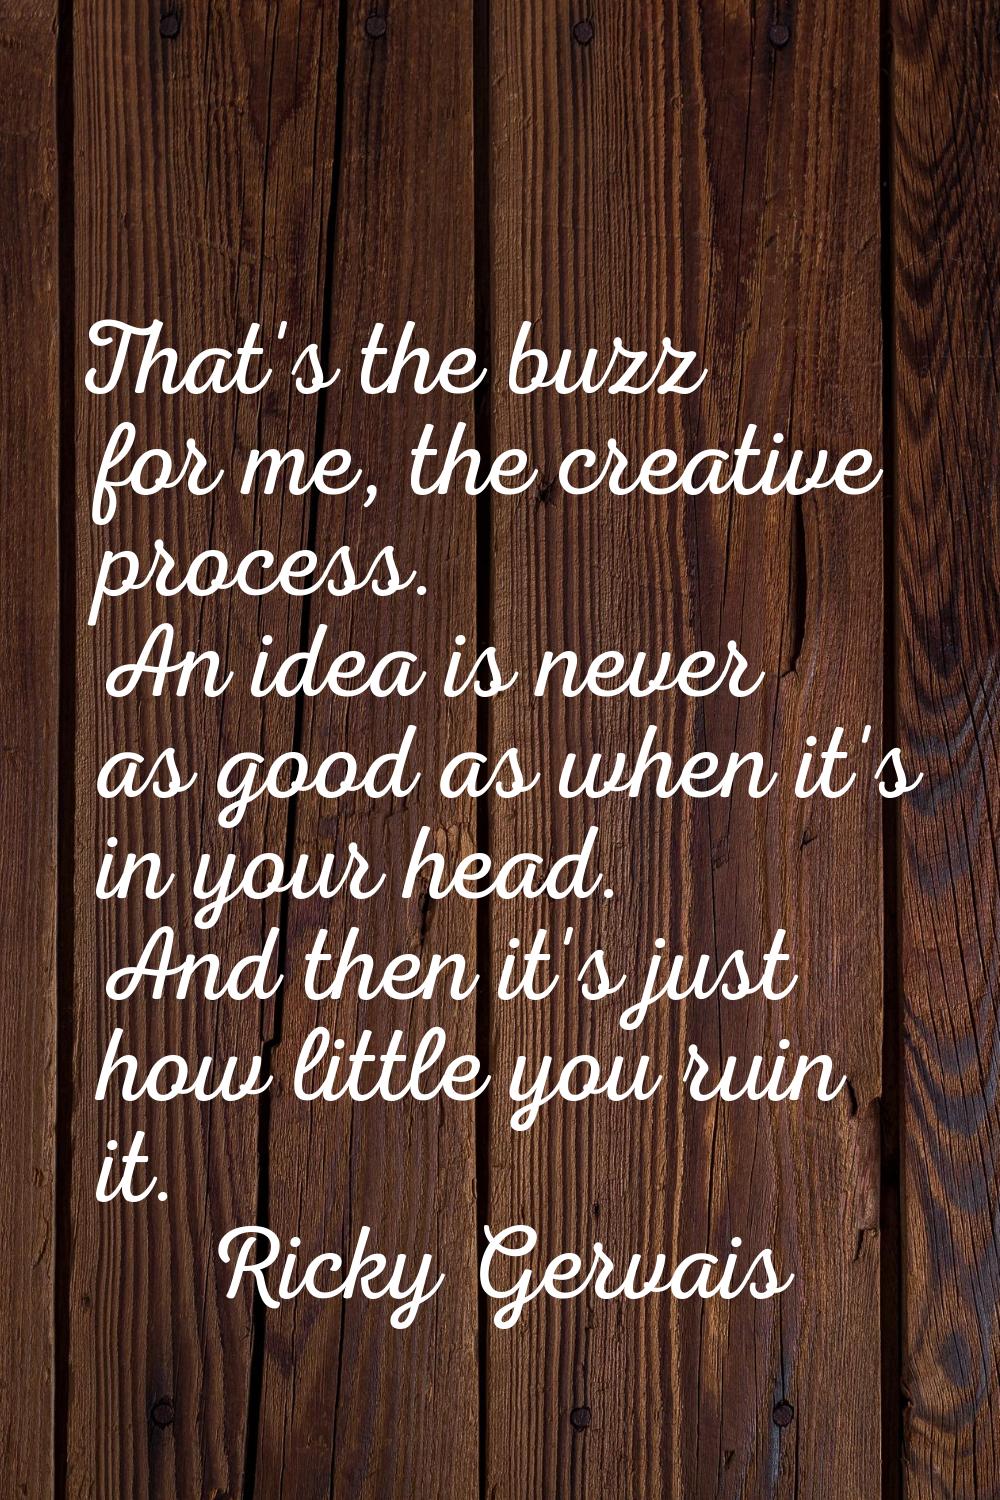 That's the buzz for me, the creative process. An idea is never as good as when it's in your head. A